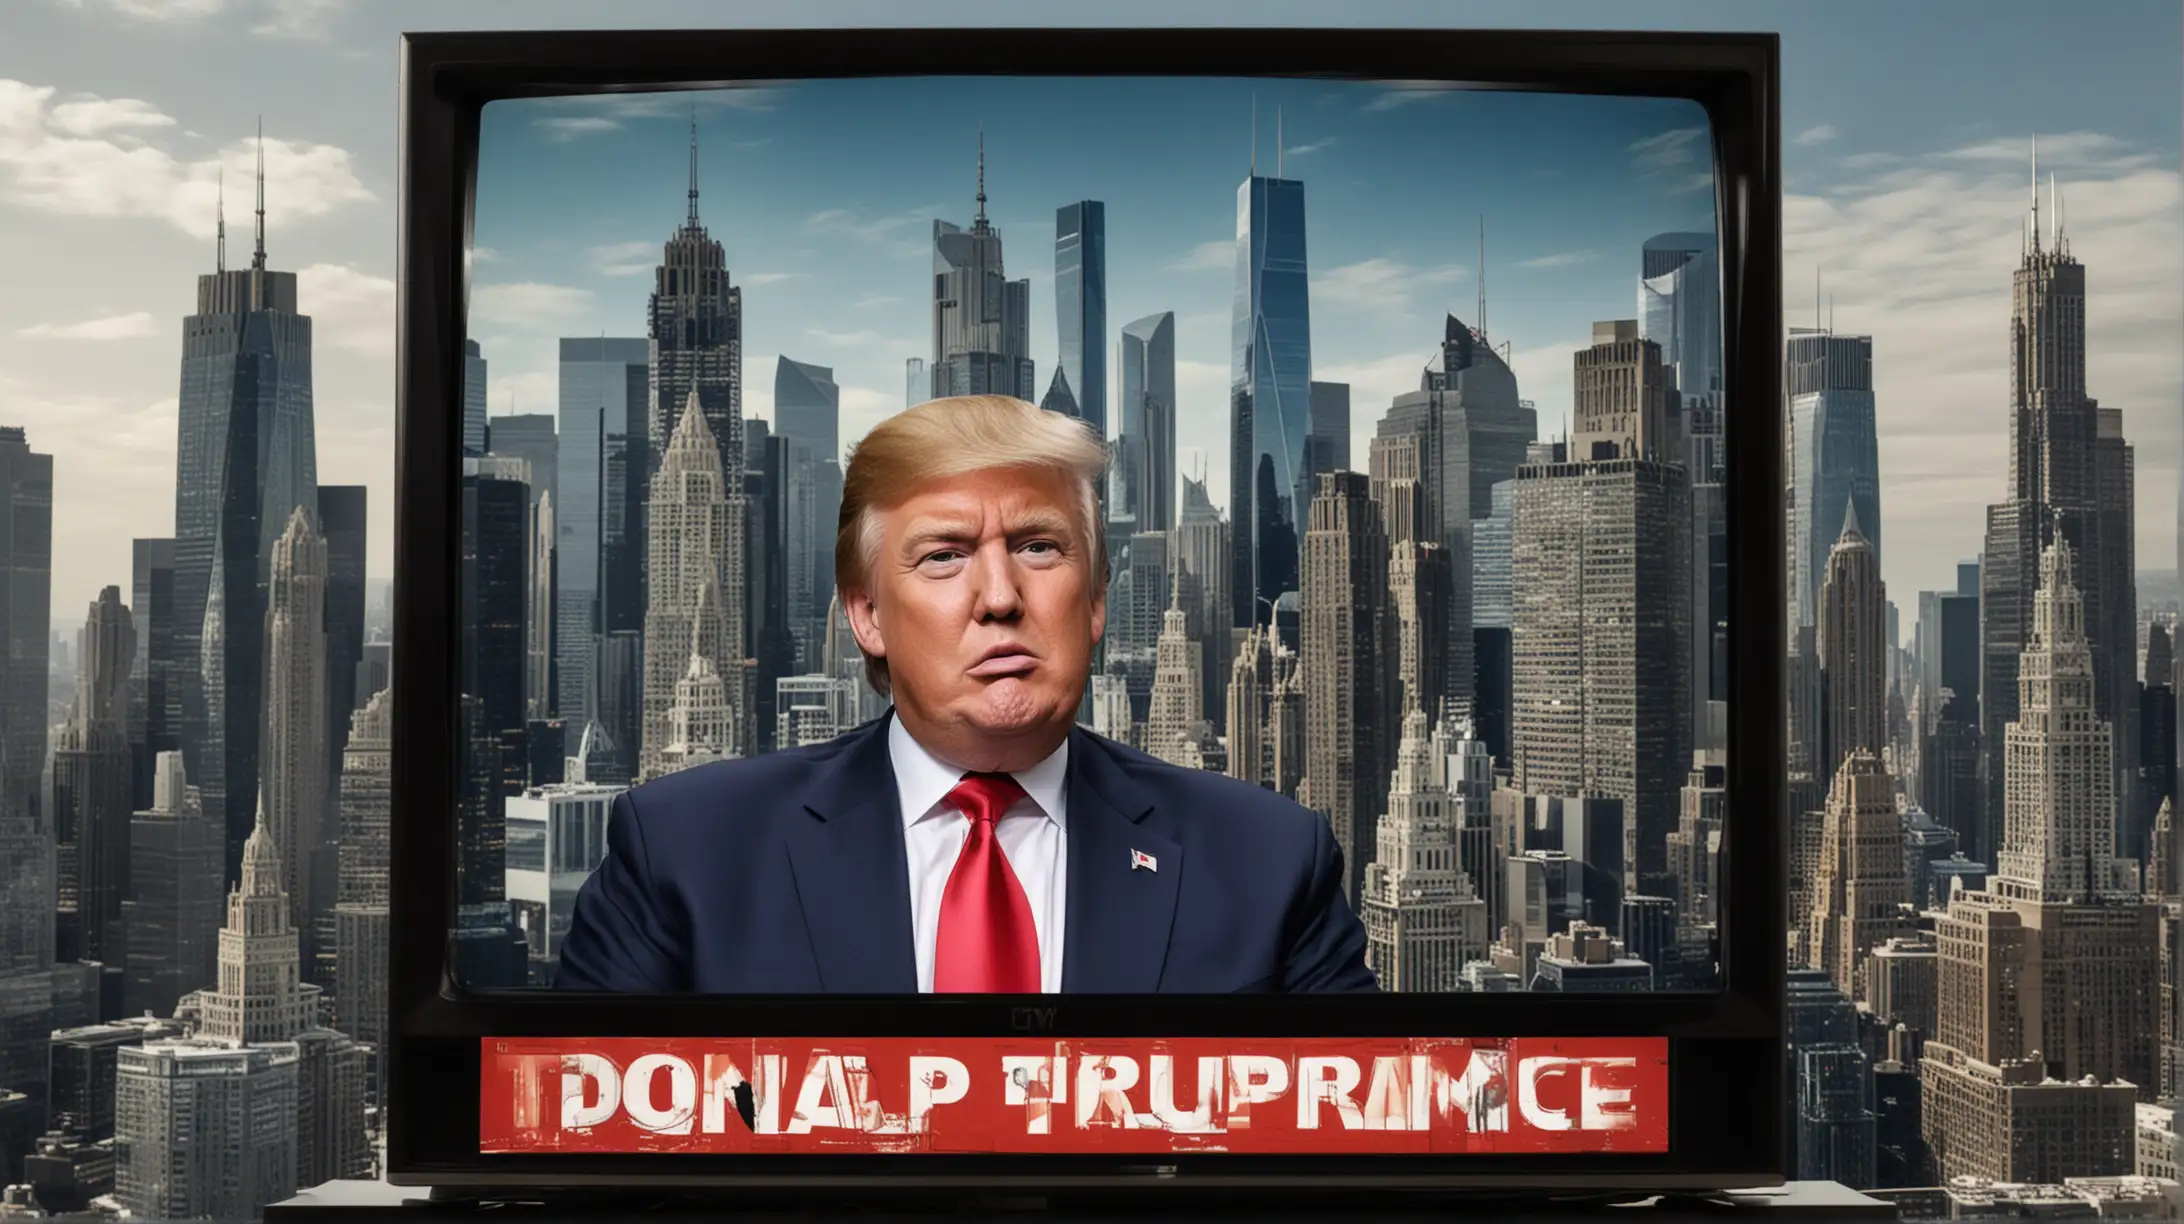 Donald Trump on Television Iconic Businessman and TV Personality Amid Skyscrapers and The Apprentice